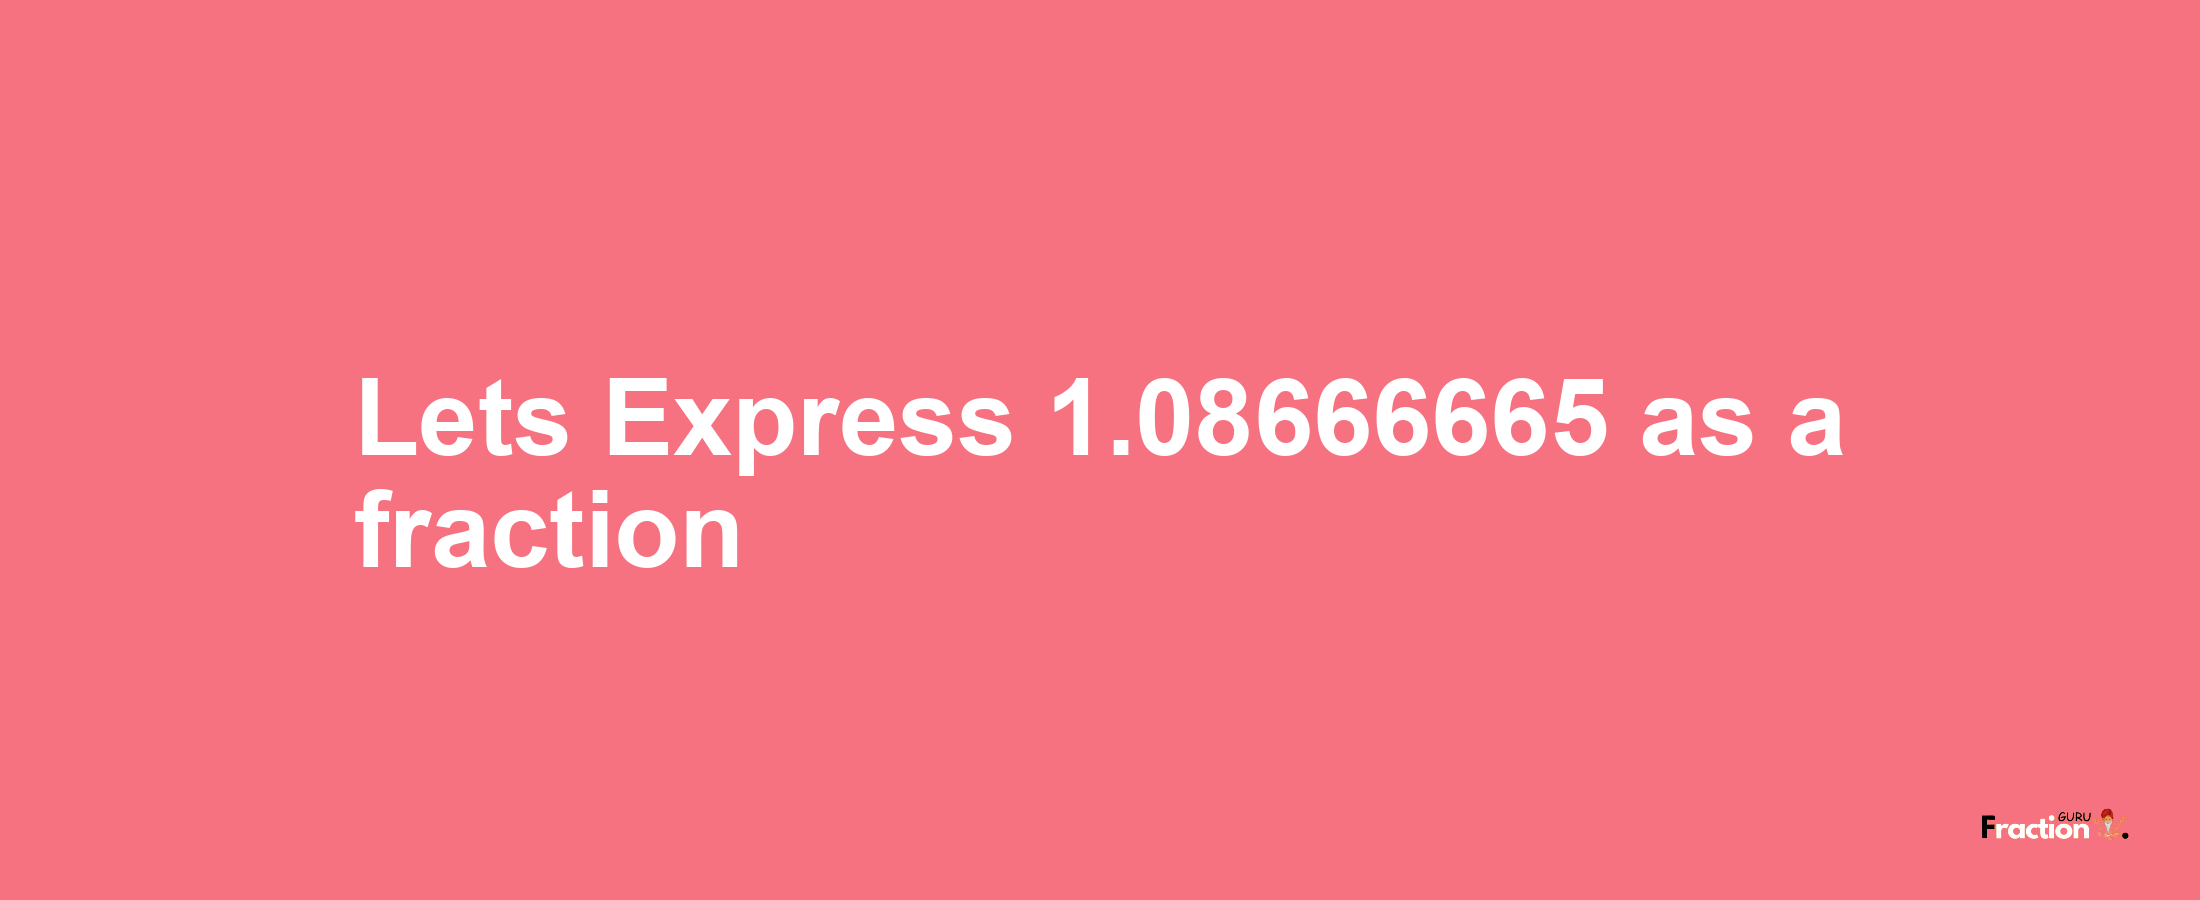 Lets Express 1.08666665 as afraction